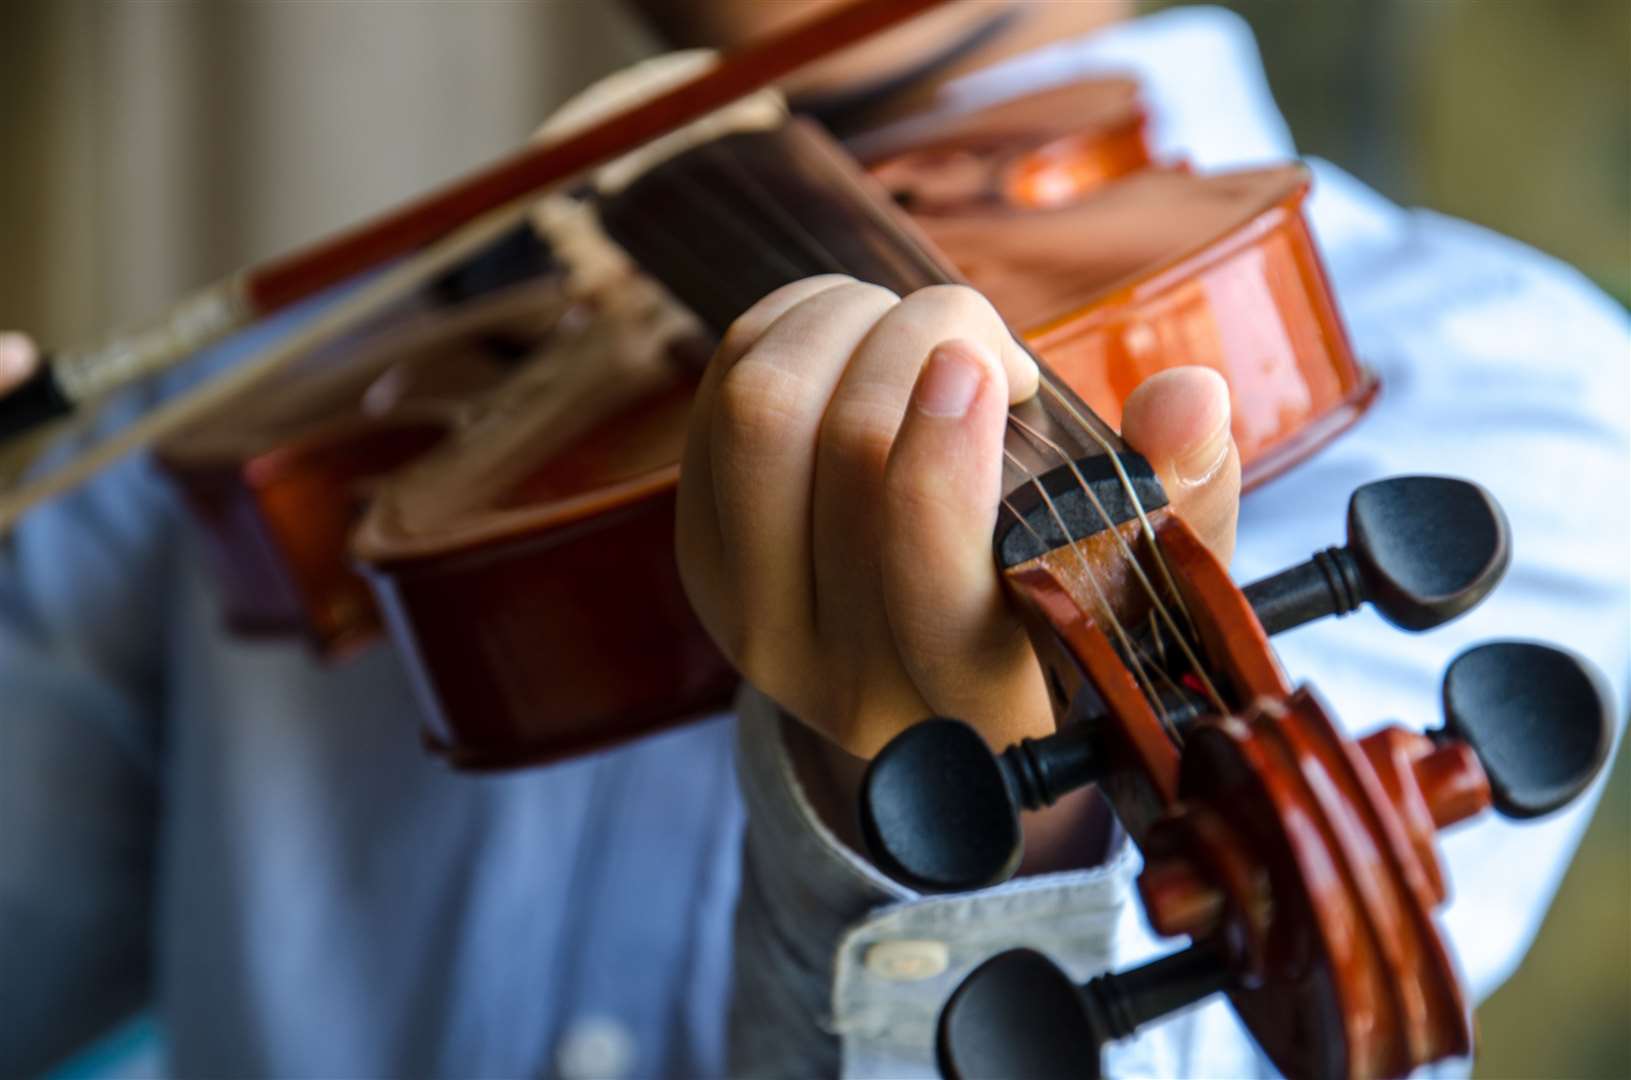 The cost of learning a musical instrument in Scottish schools will be waived.